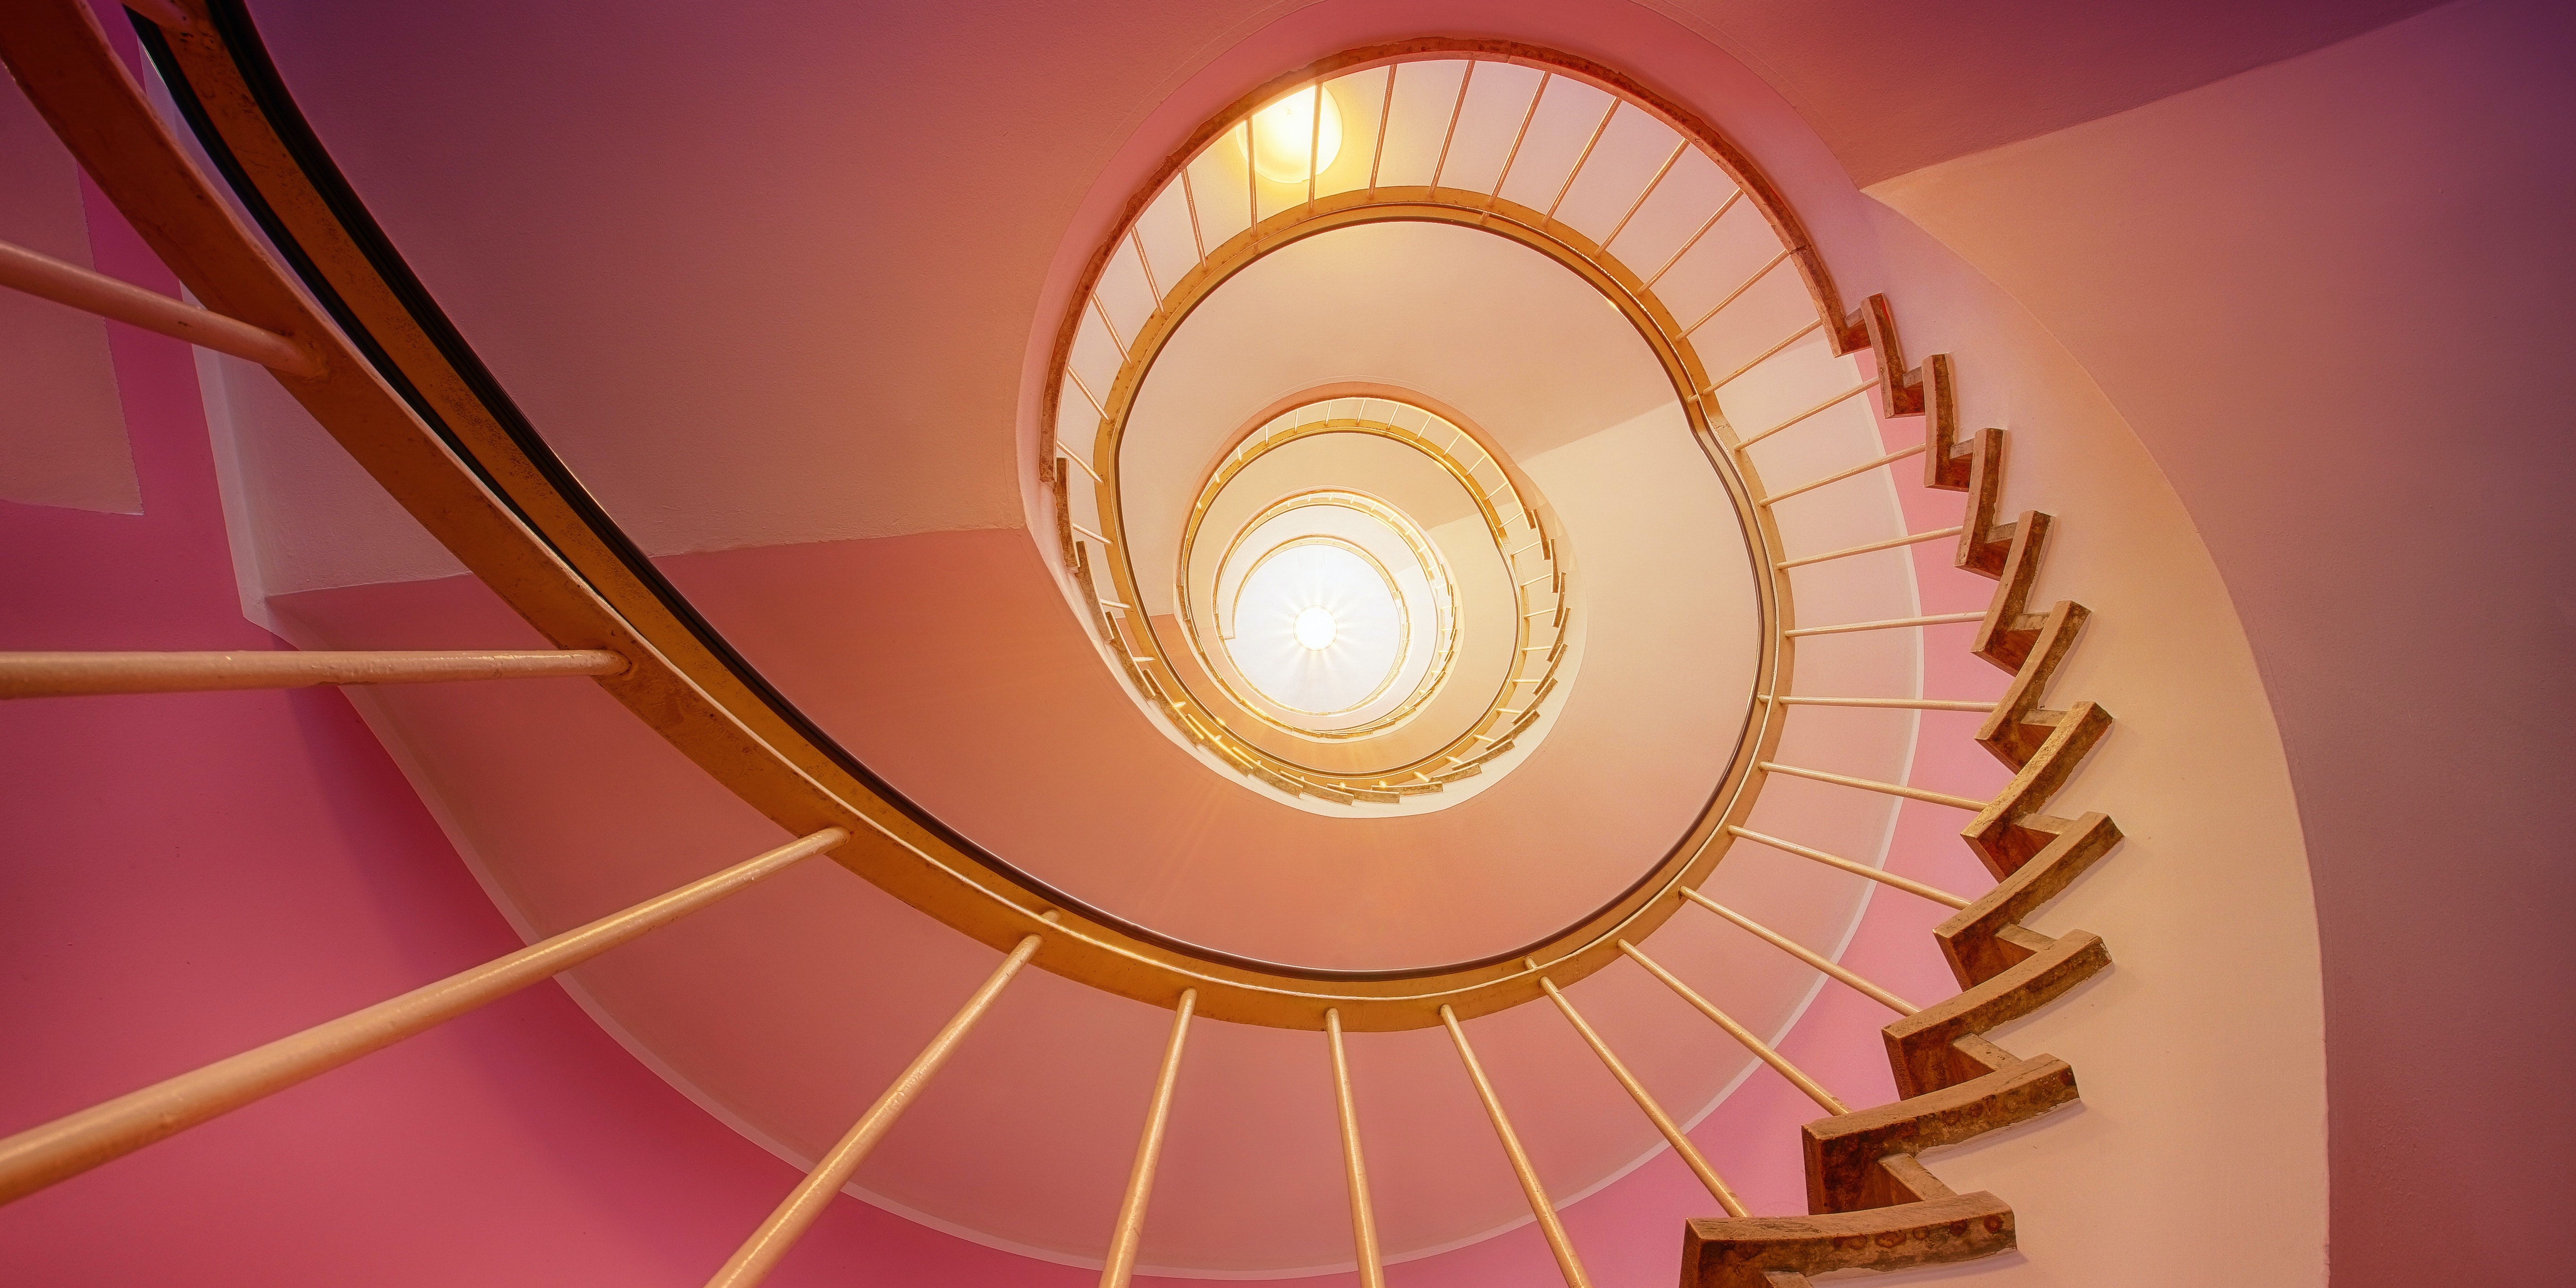 View looking up toward a skylight through many floors of a spiral staircase, in warm pink and yellow hues